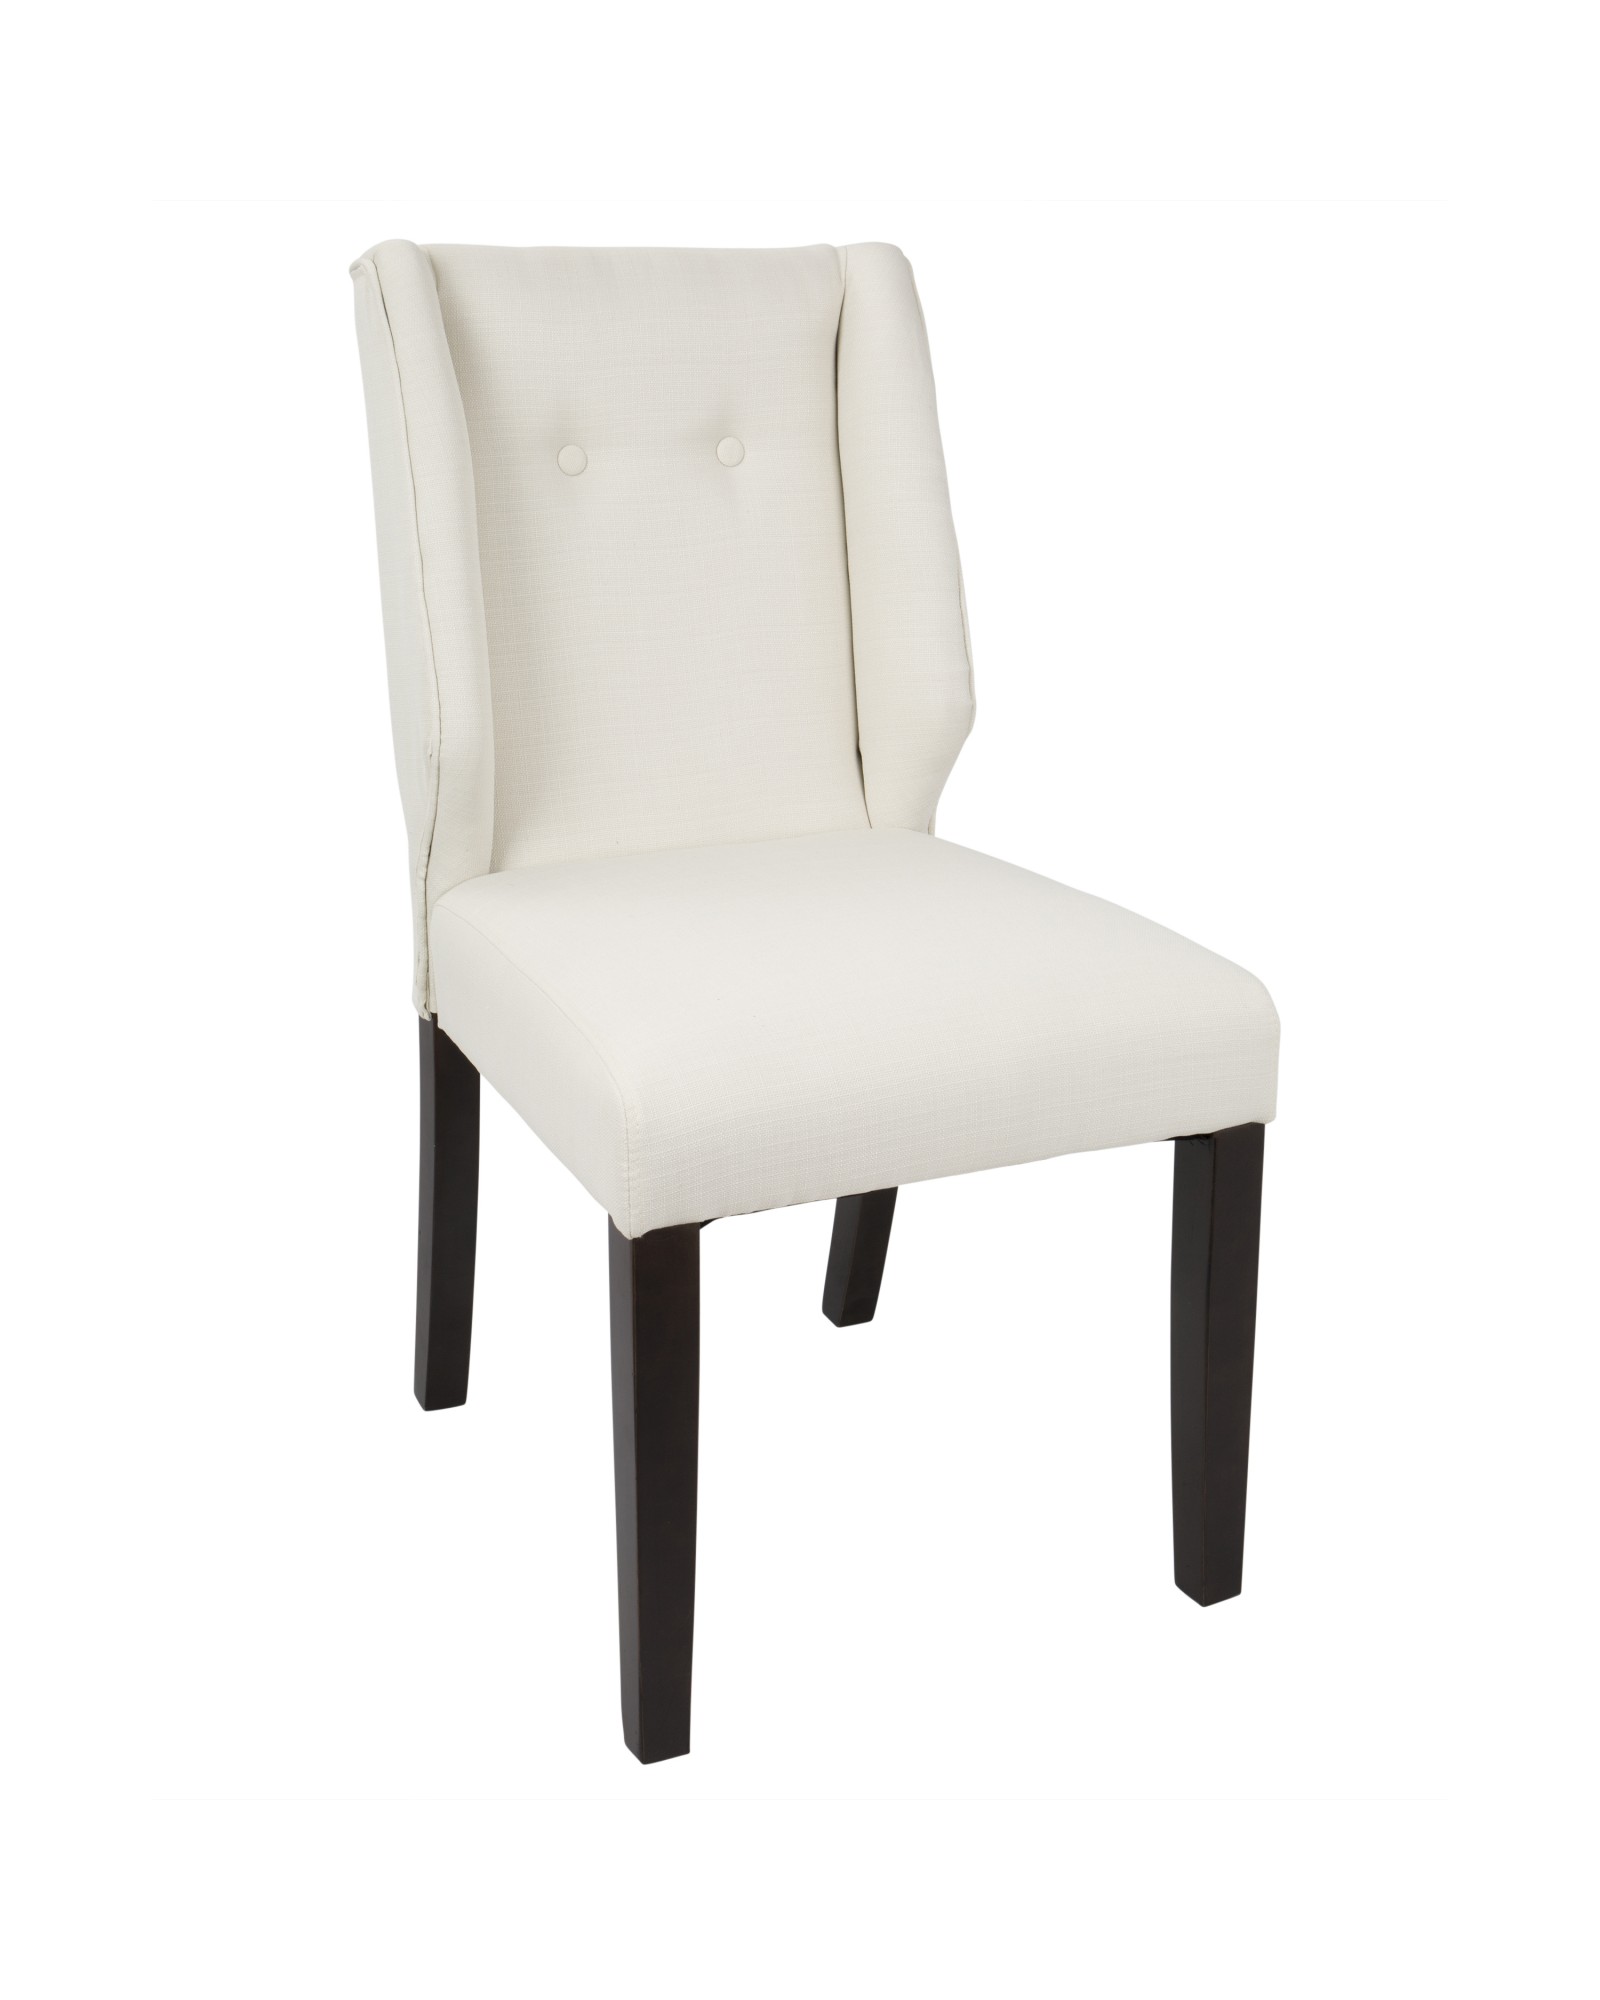 Rosario Contemporary Dining Chair in Walnut and Cream - Set of 2